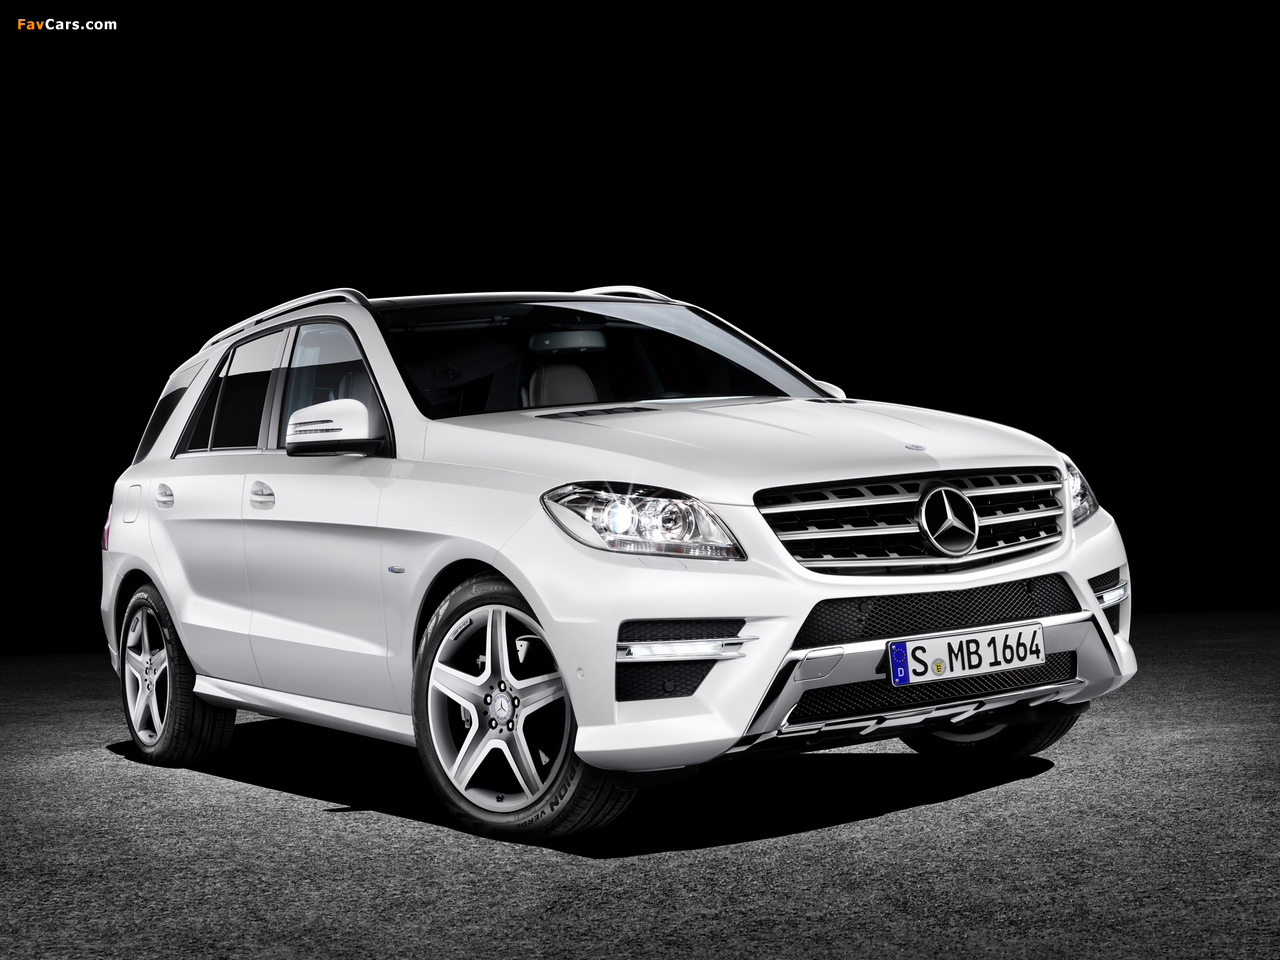 Mercedes-Benz ML 350 BlueTec AMG Sports Package Edition 1 (W166) 2011 pictures (1280 x 960)